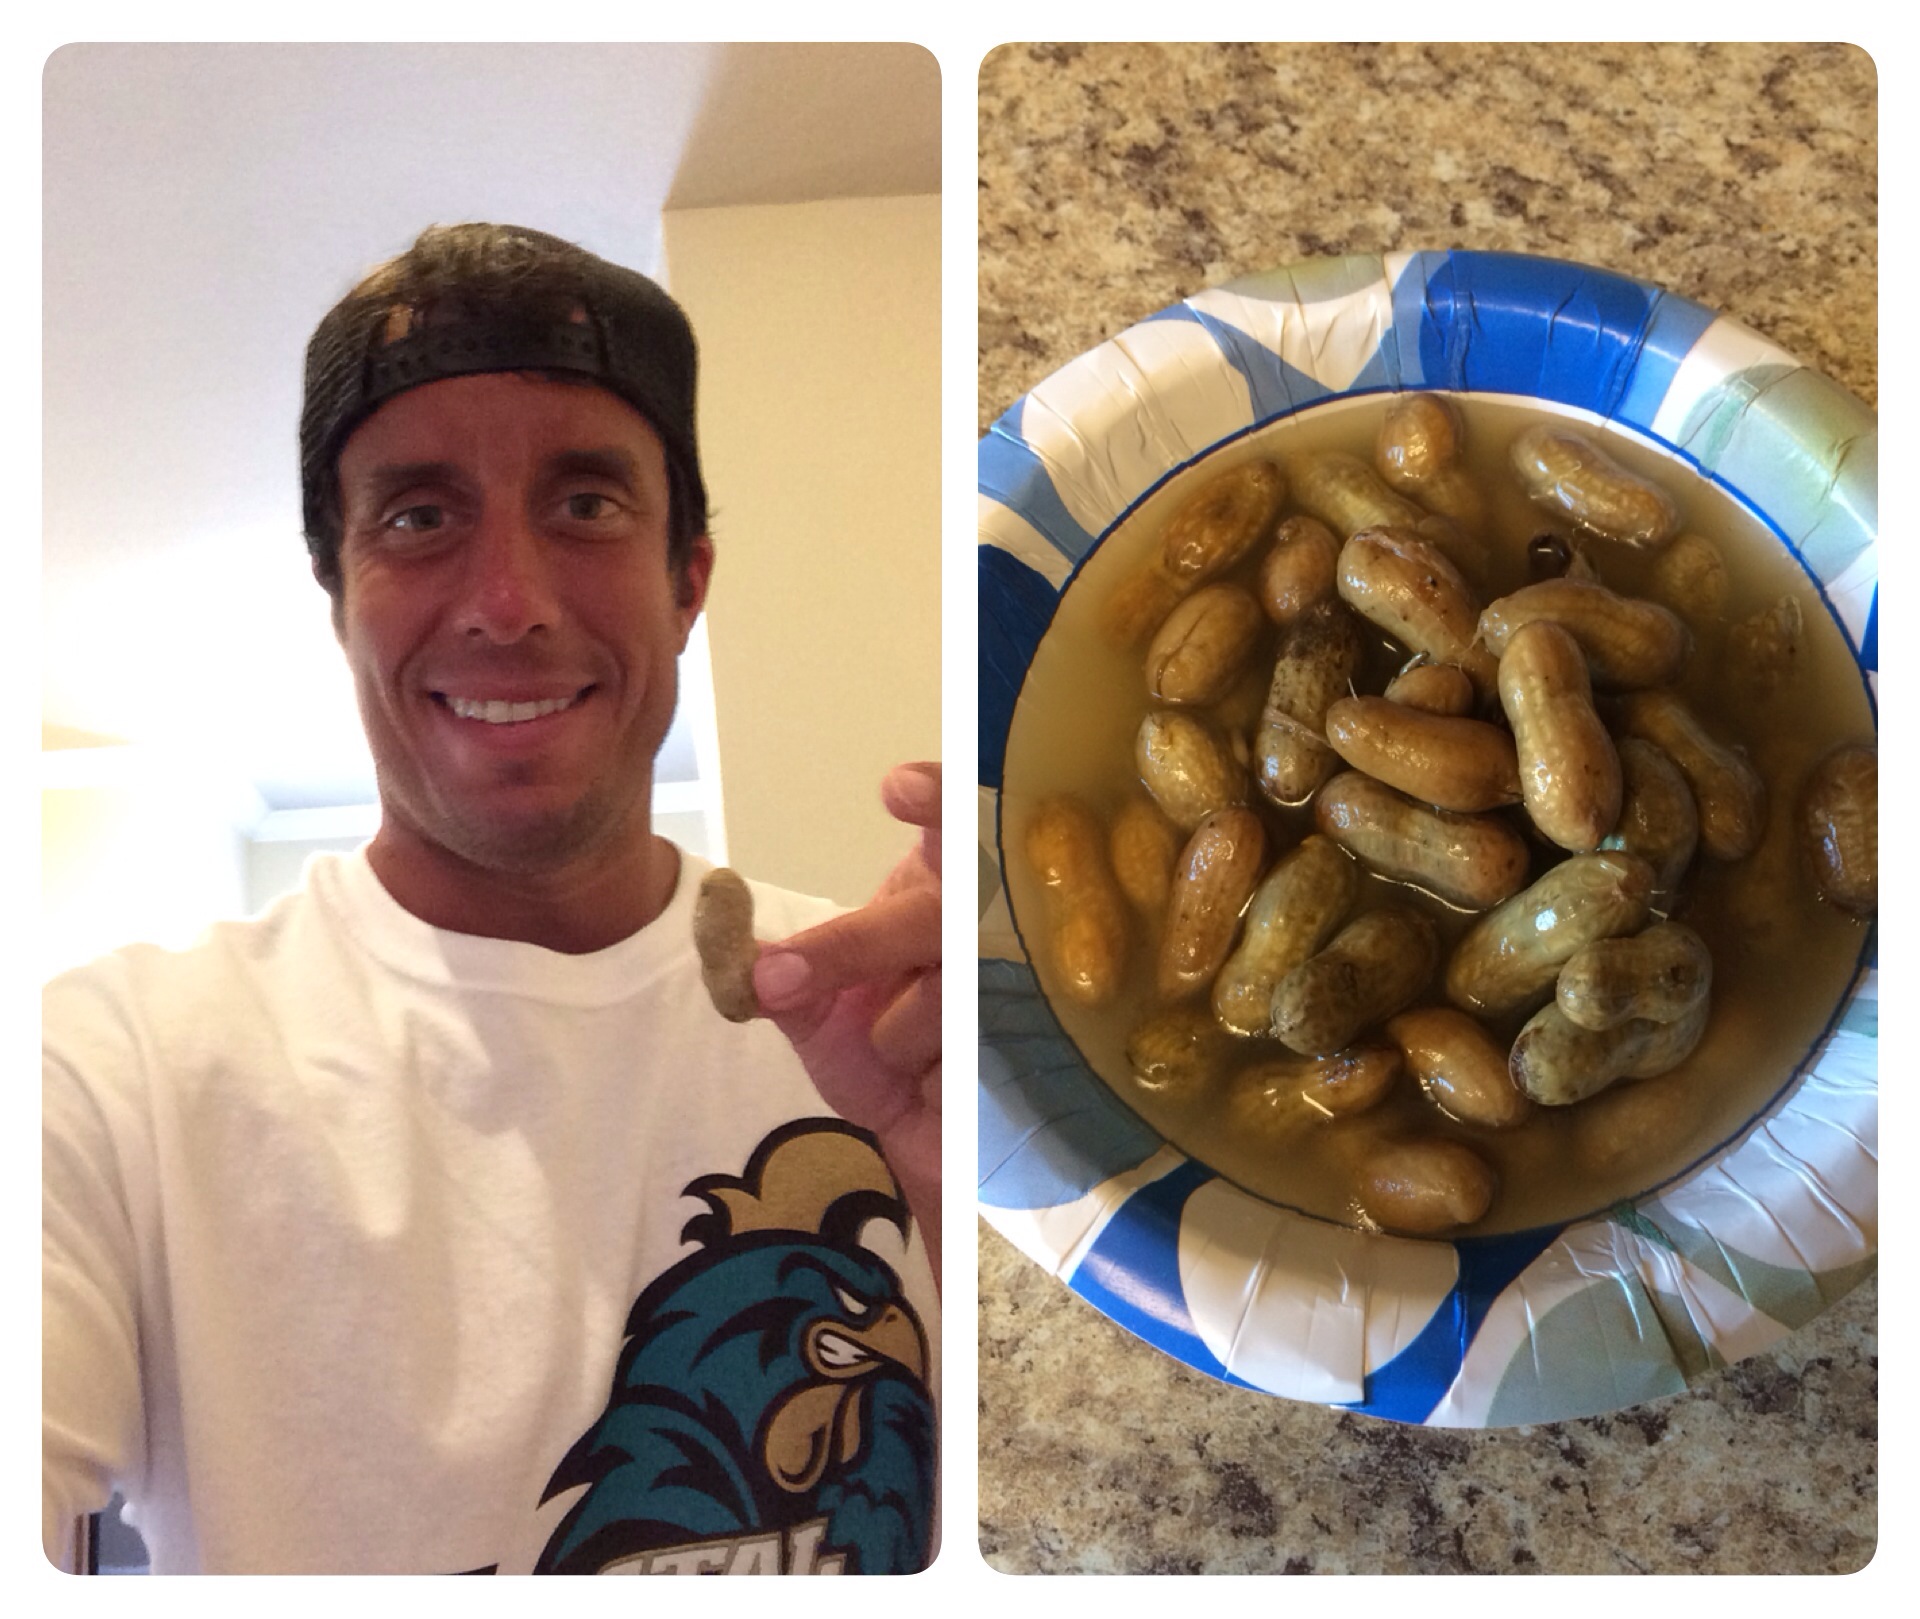 Boiled peanuts and I got off on the wrong foot but now I love them!!